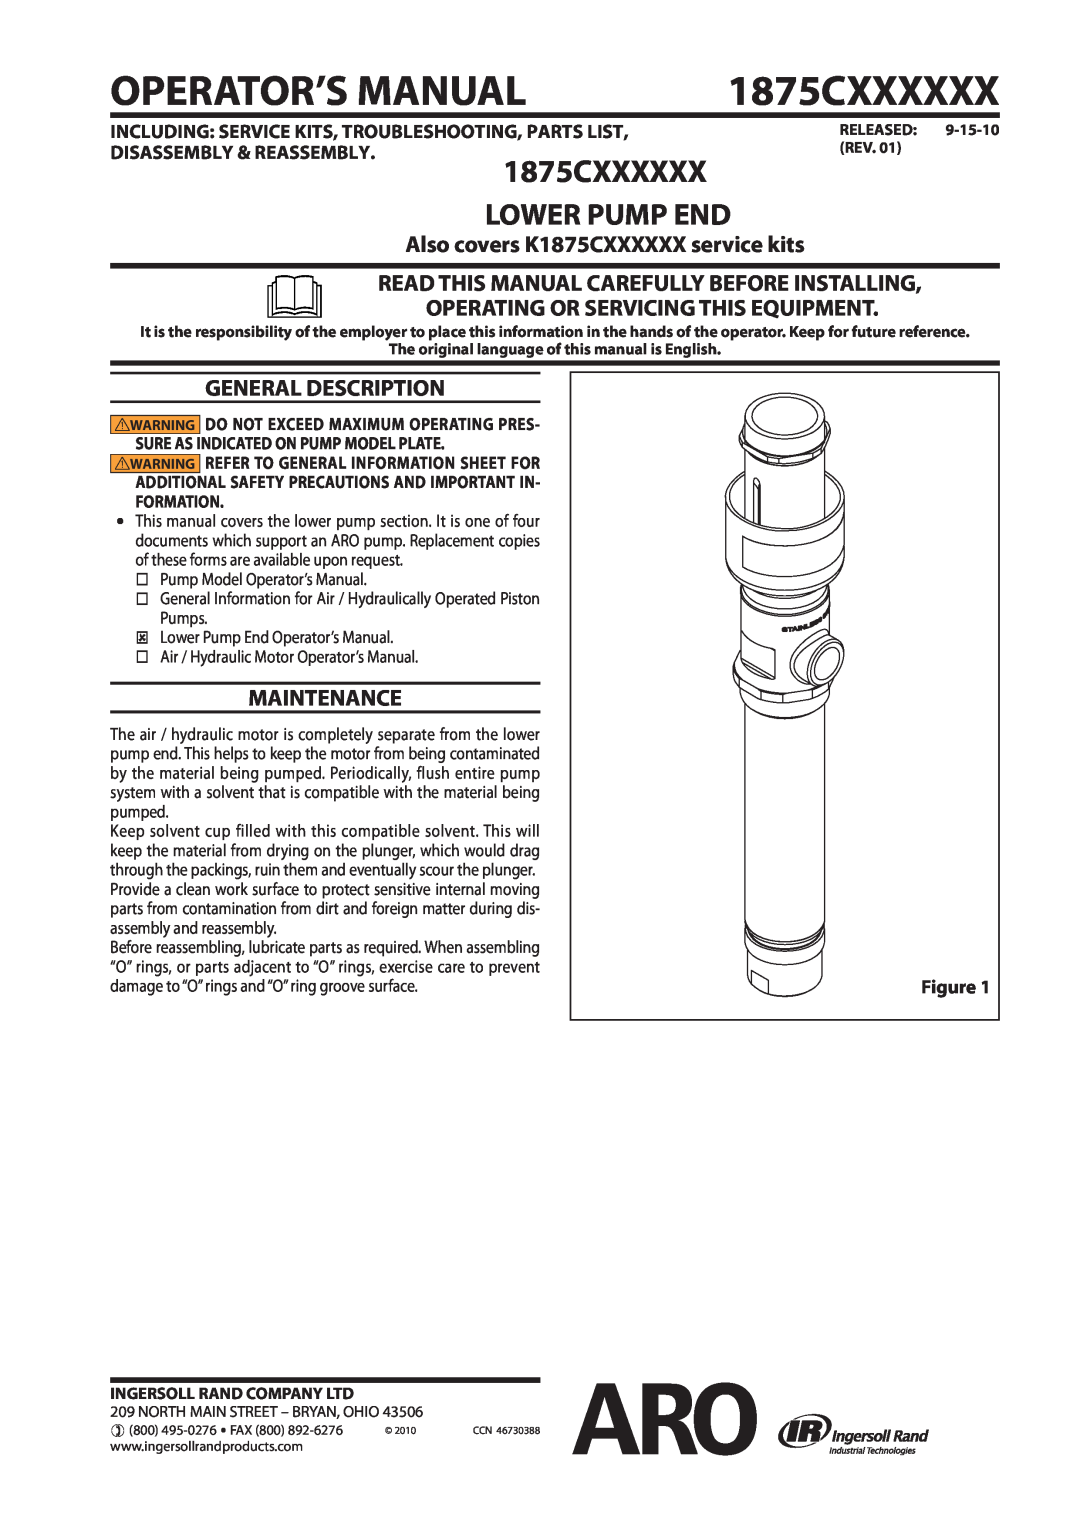 Ingersoll-Rand manual Also covers K1875CXXXXXX service kits, Read This Manual Carefully Before Installing, Maintenance 